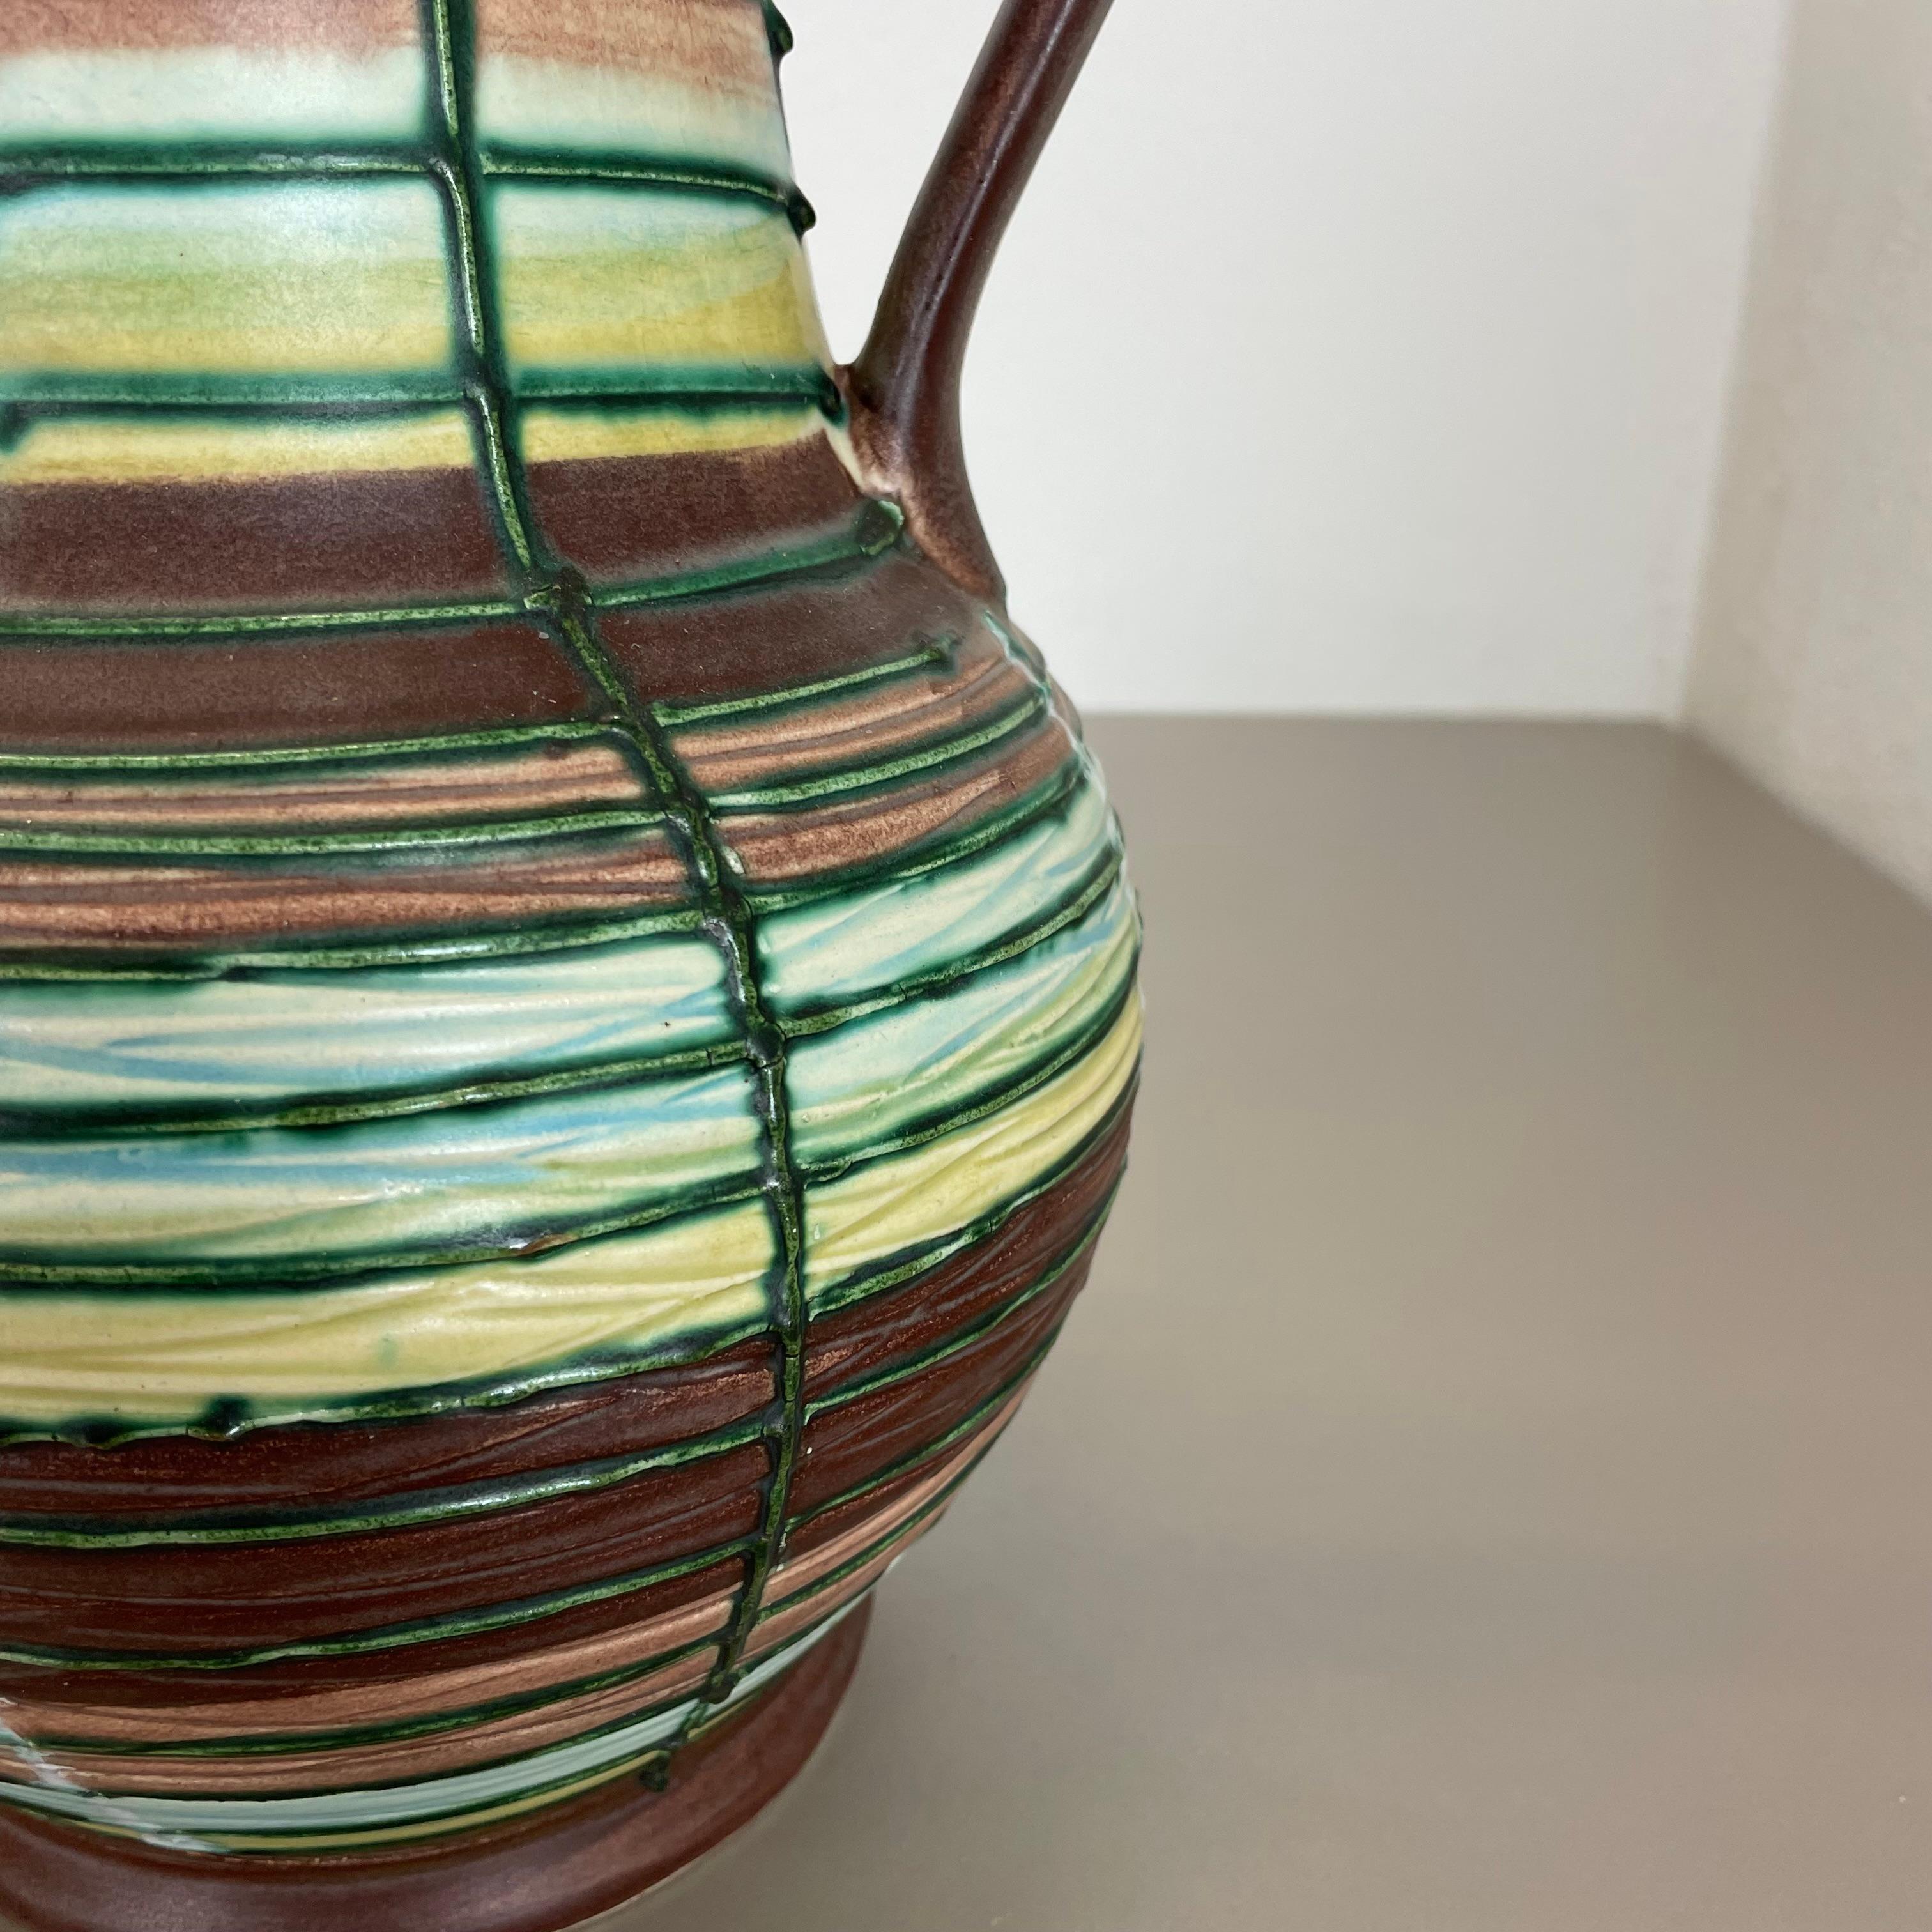 Super Colorful 31cm Fat Lava Pottery Vase by Bay Ceramics, Germany, 1970s For Sale 6